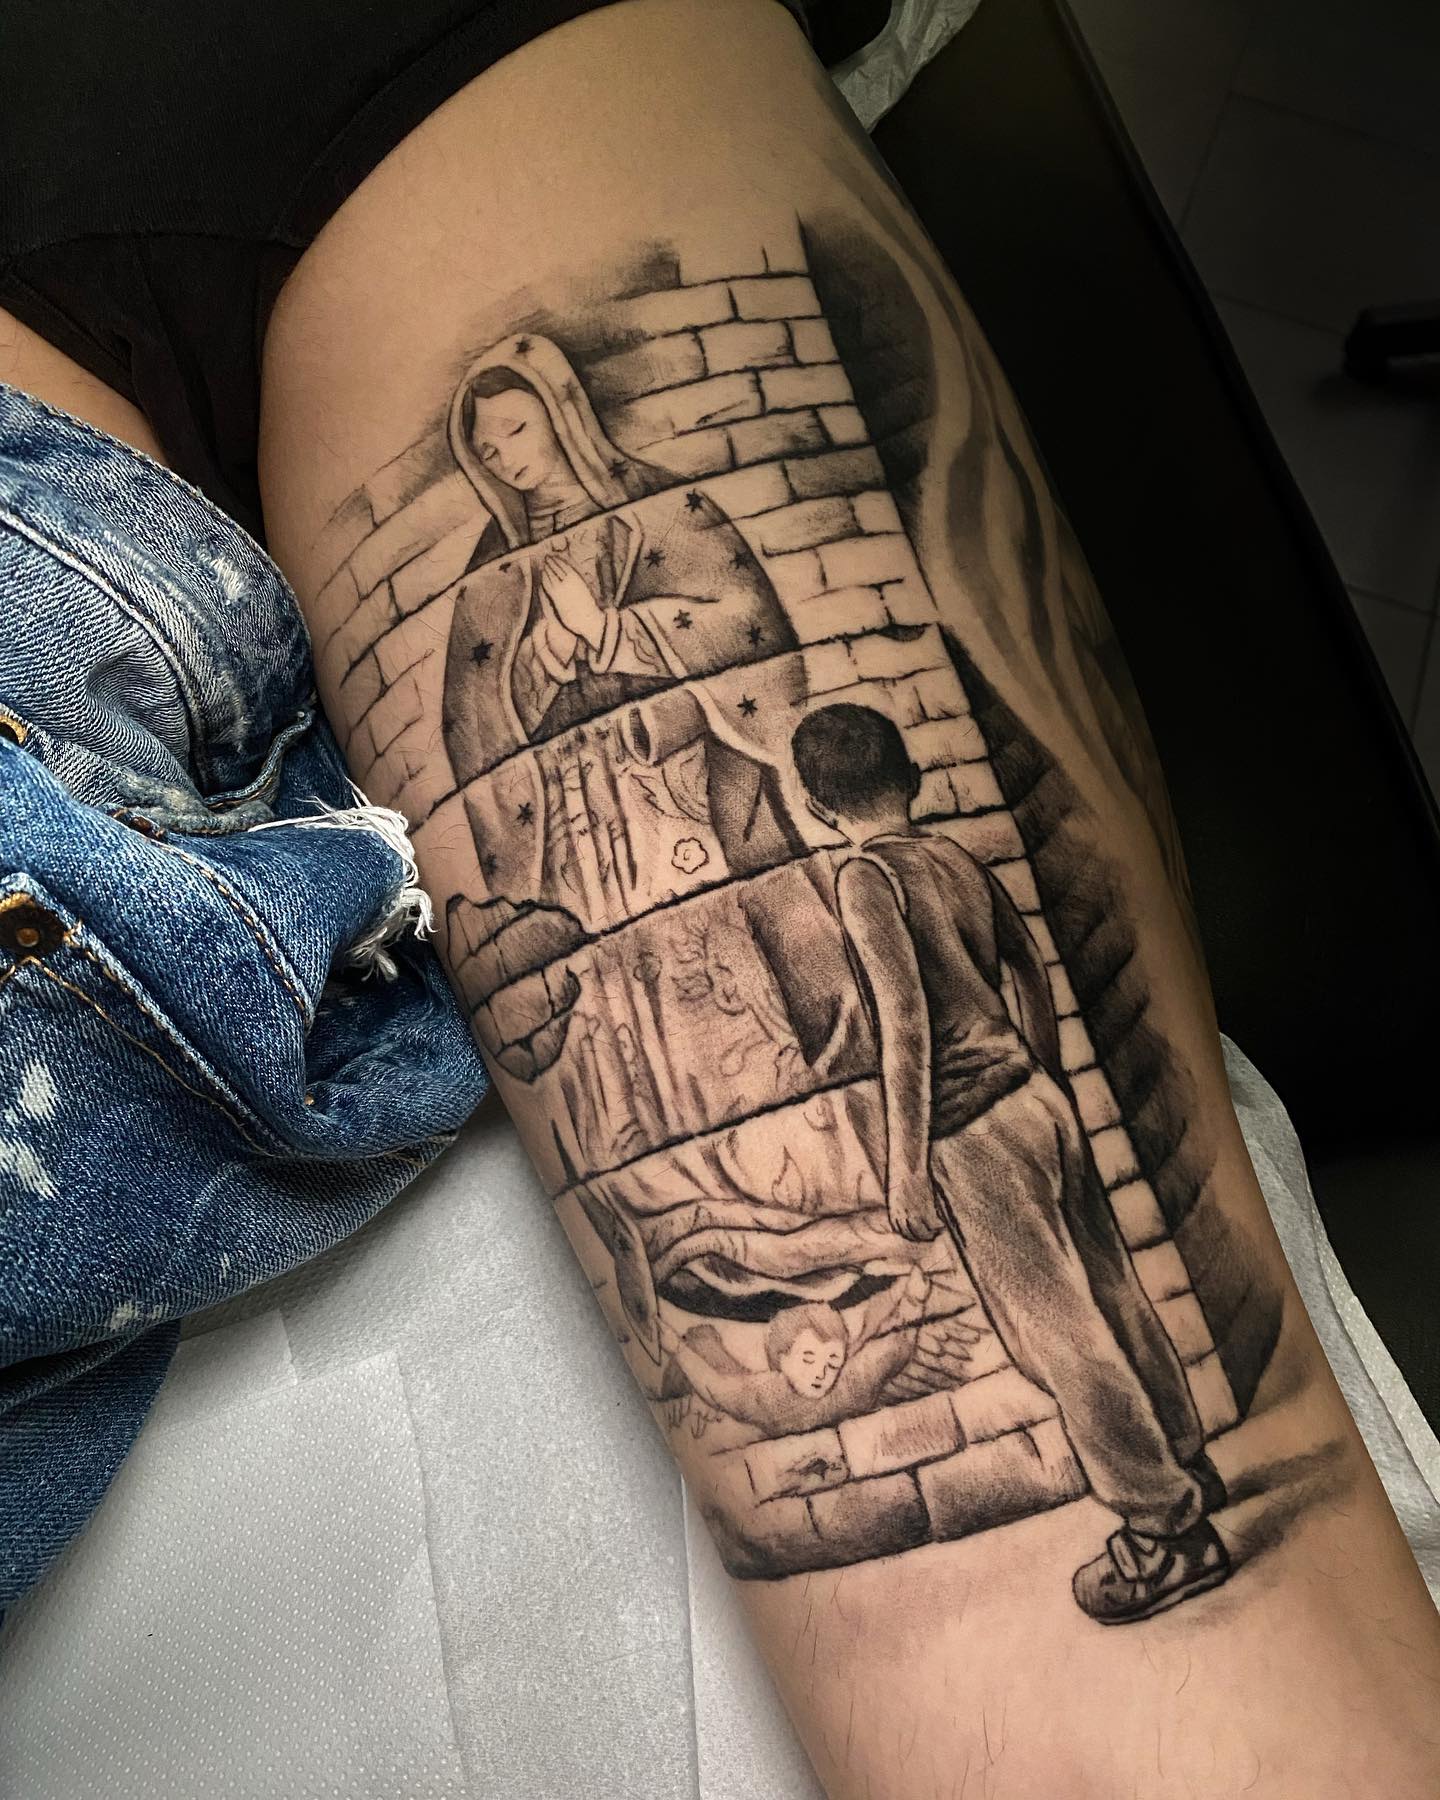 30+ Chicano Tattoo Ideas For Men From All Walks Of Life - 100 Tattoos